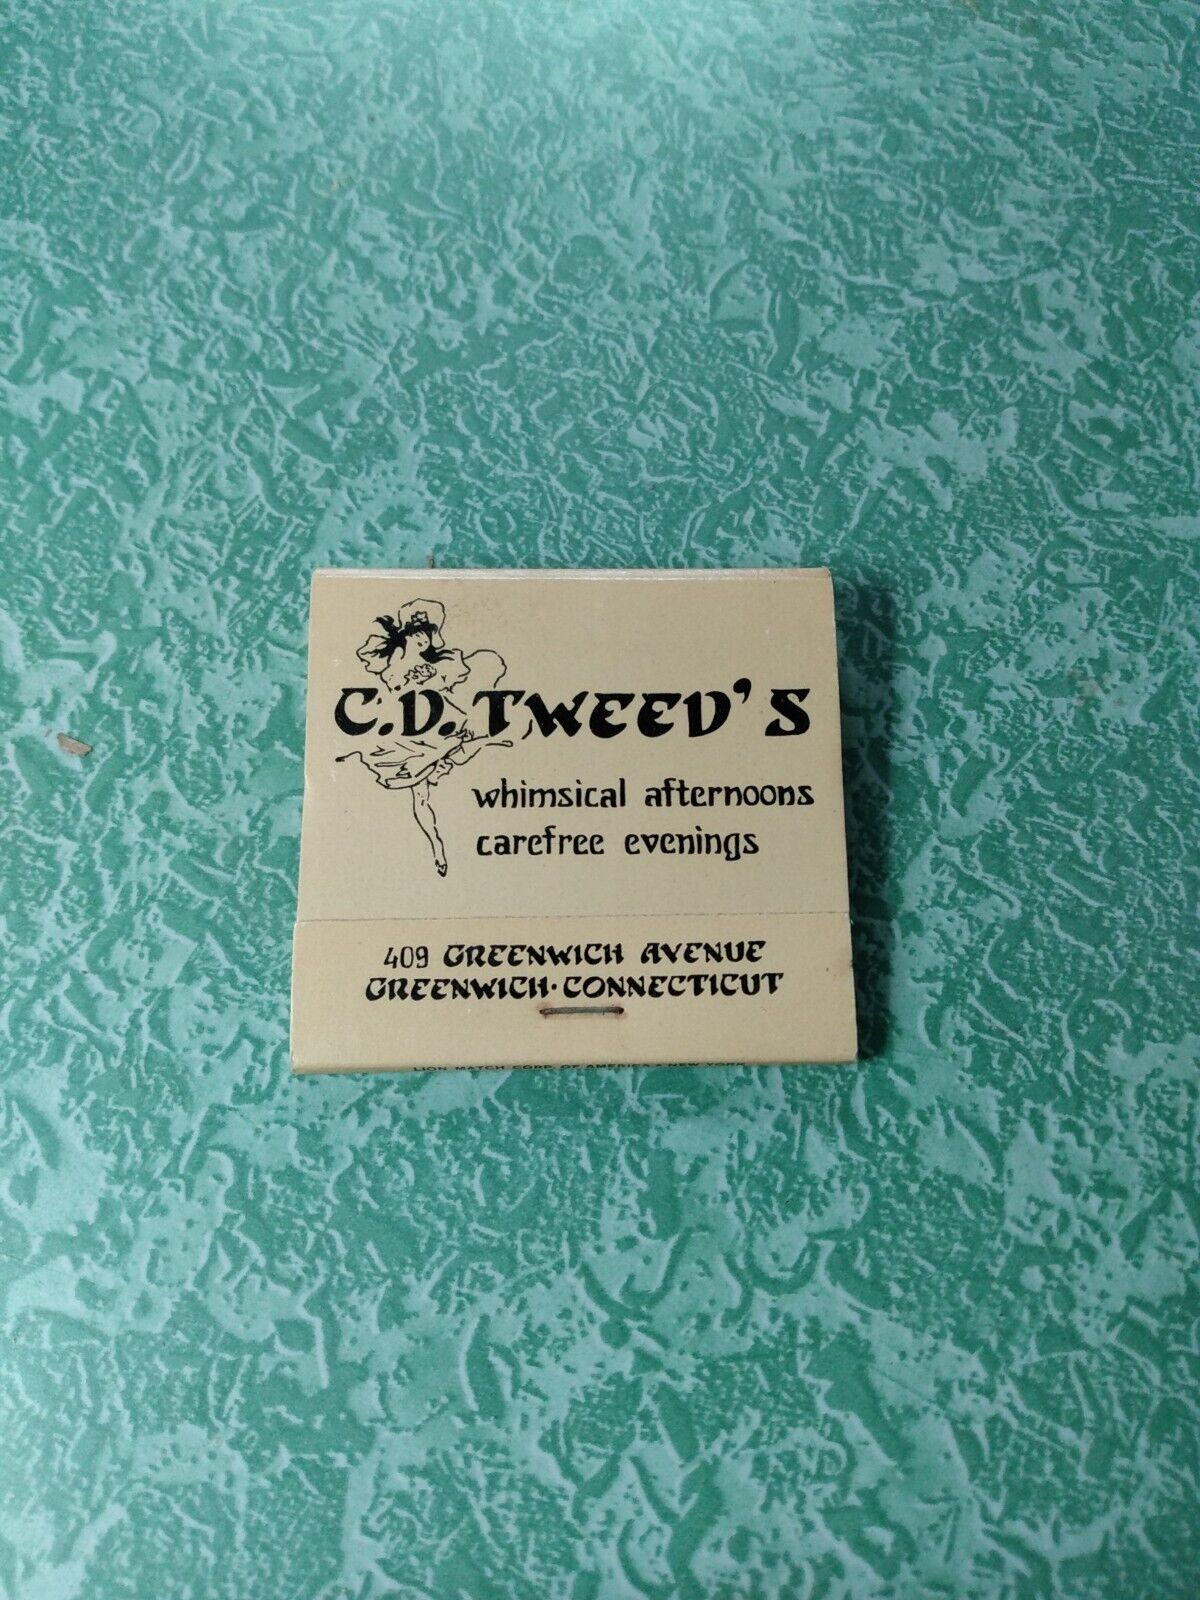 Vintage Matchbook Collectible Ephemera D32 Greenwich Connecticut Tweed whimsical